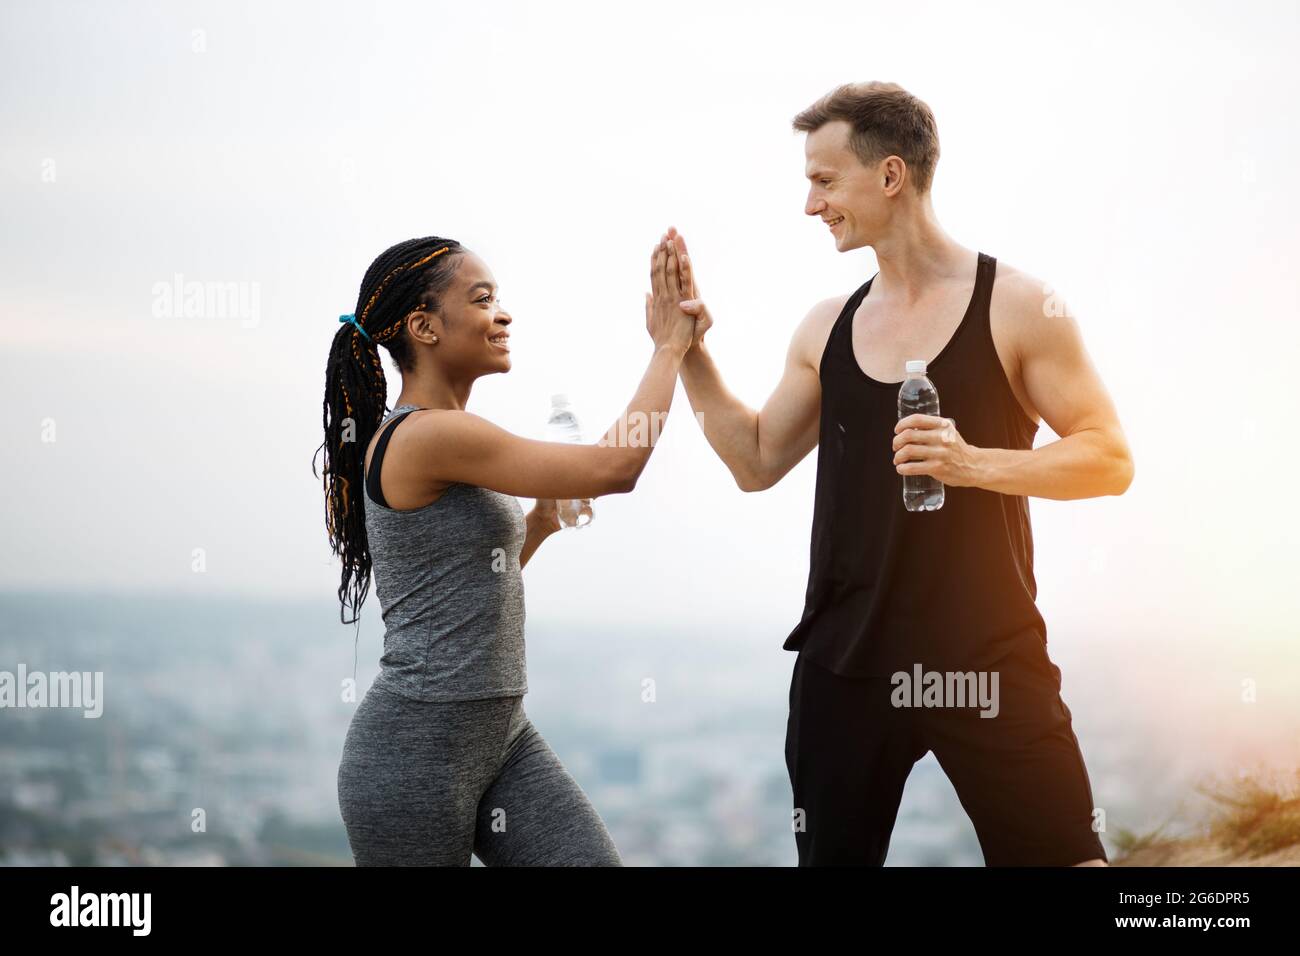 https://c8.alamy.com/comp/2G6DPR5/smiling-young-couple-dressed-in-sport-clothes-giving-high-five-to-each-other-after-active-workout-on-fresh-air-african-woman-and-caucasian-man-holding-bottle-of-fresh-water-2G6DPR5.jpg